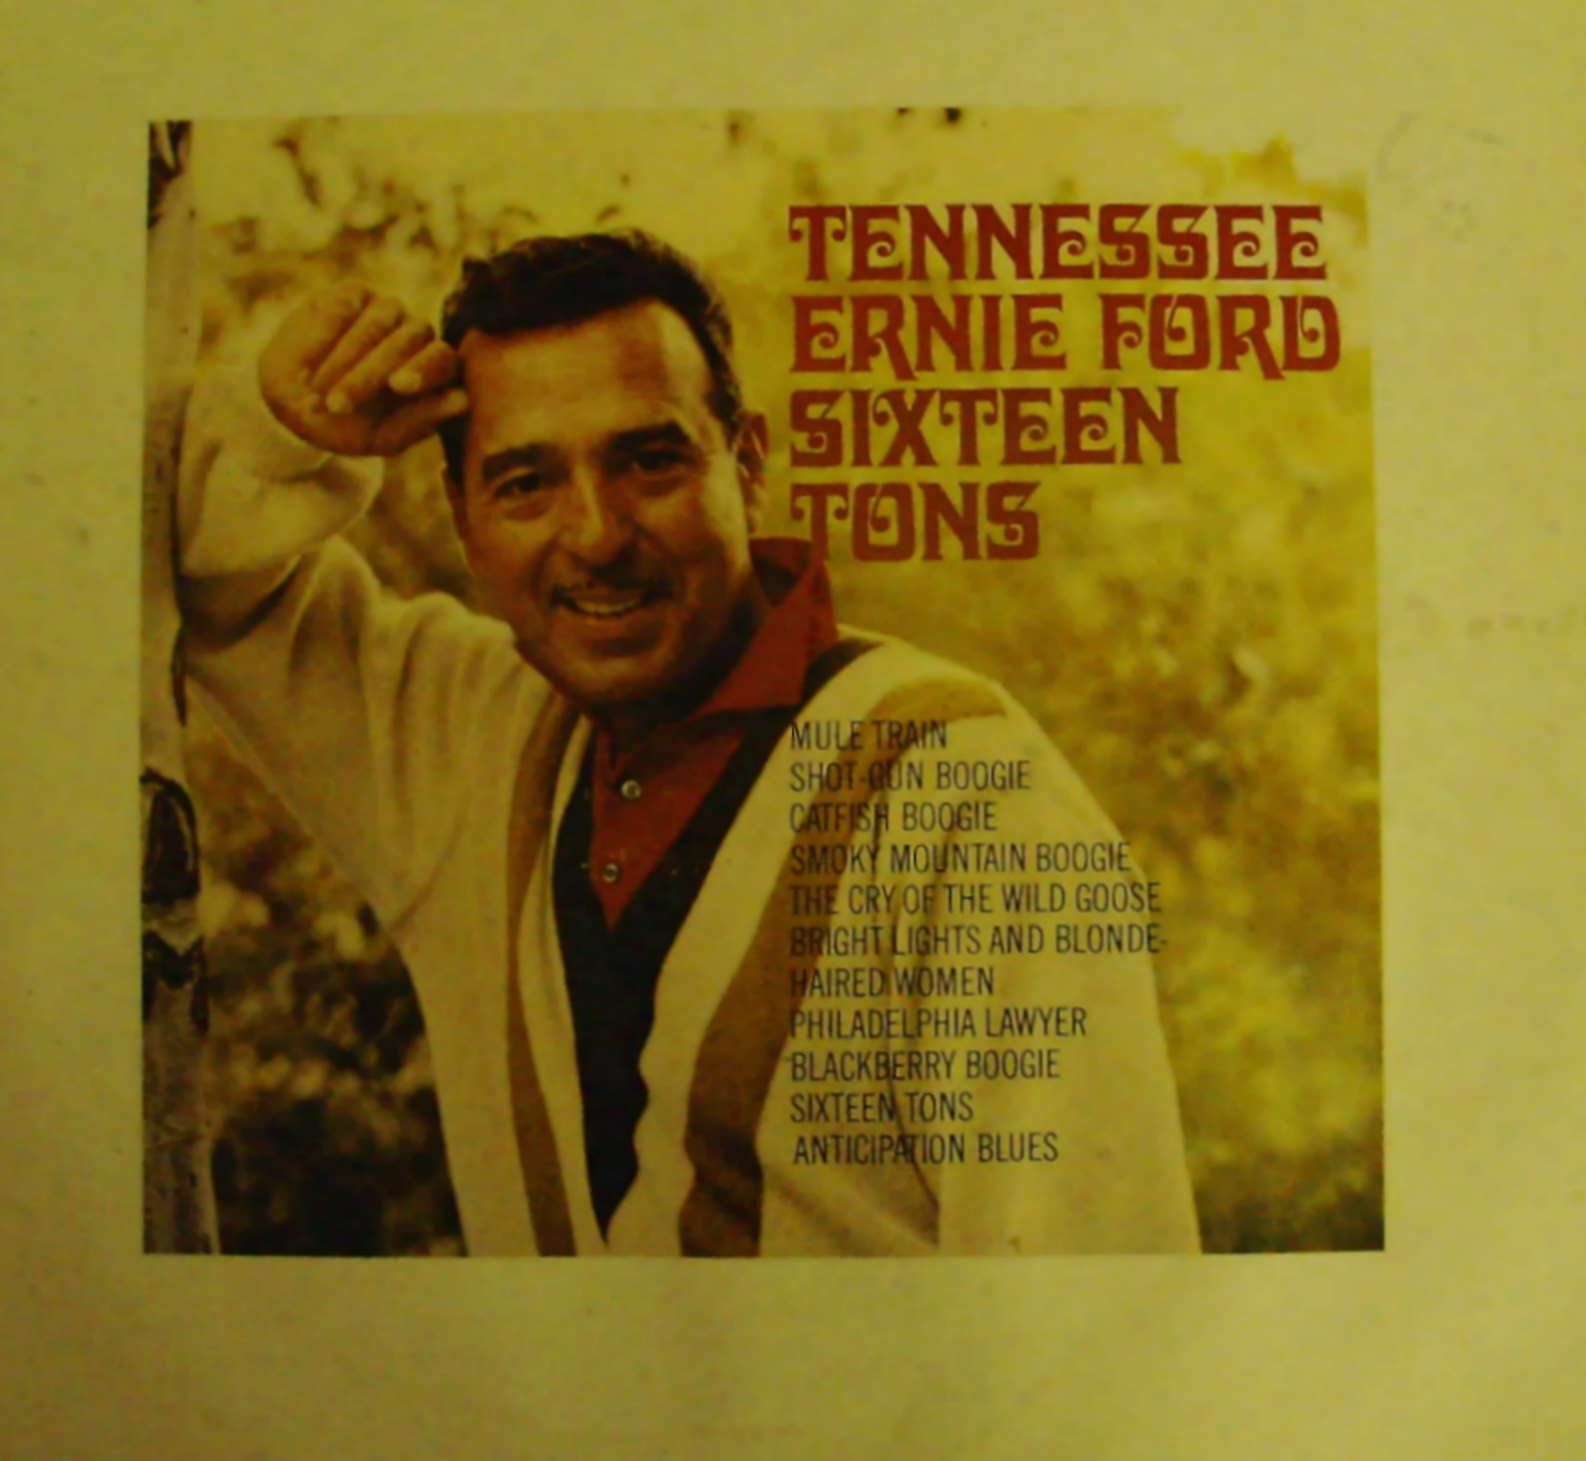 Tennessee ernie ford sixteen tons lyrics and chords